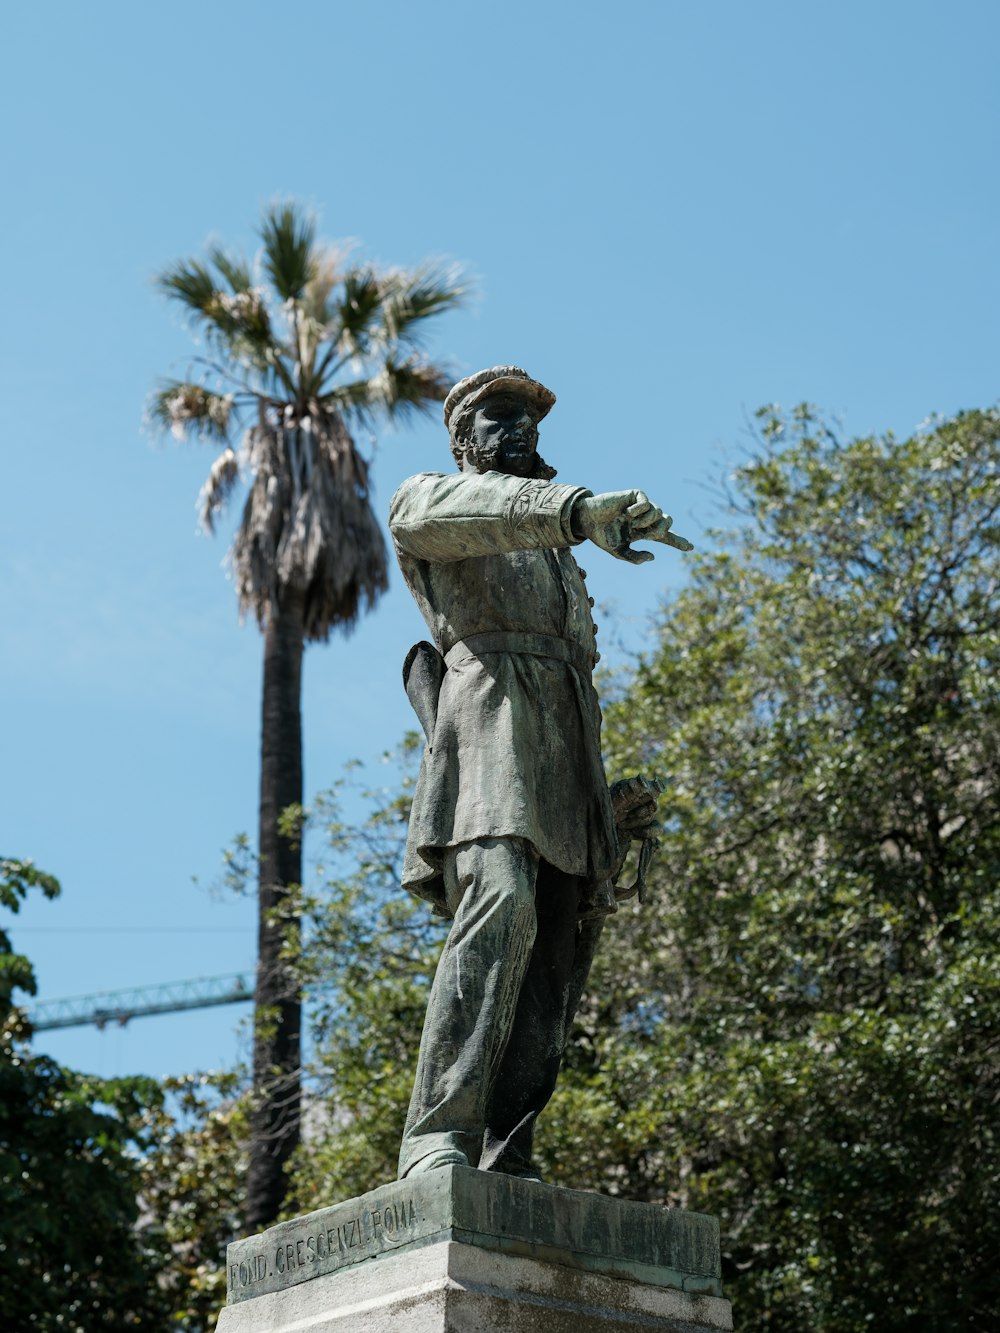 a statue of a person holding a tree